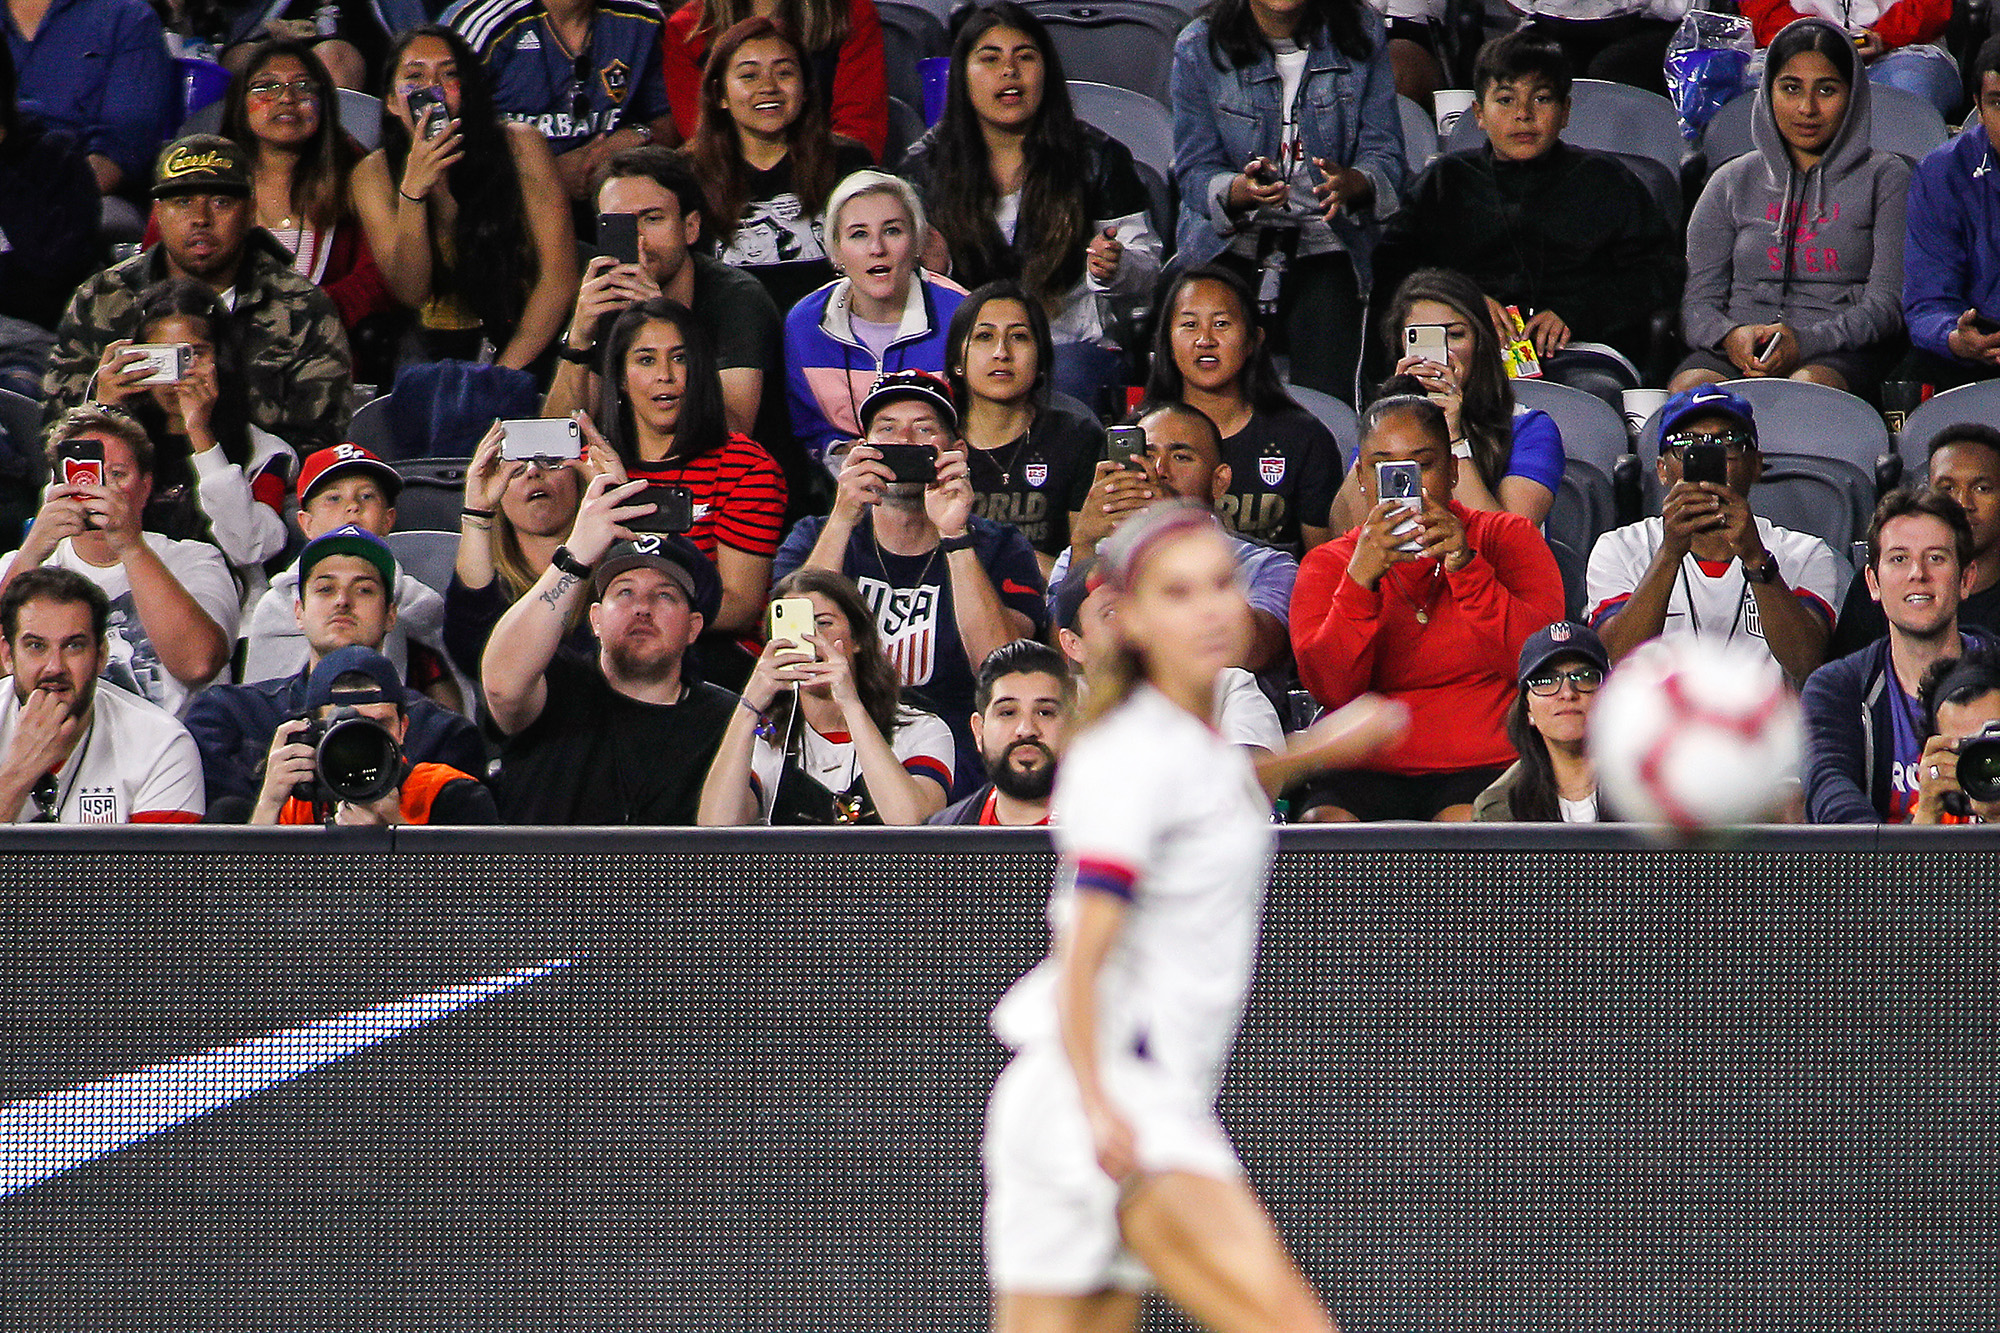 Fans in stands take photographs of soccer star Alex Morgan.